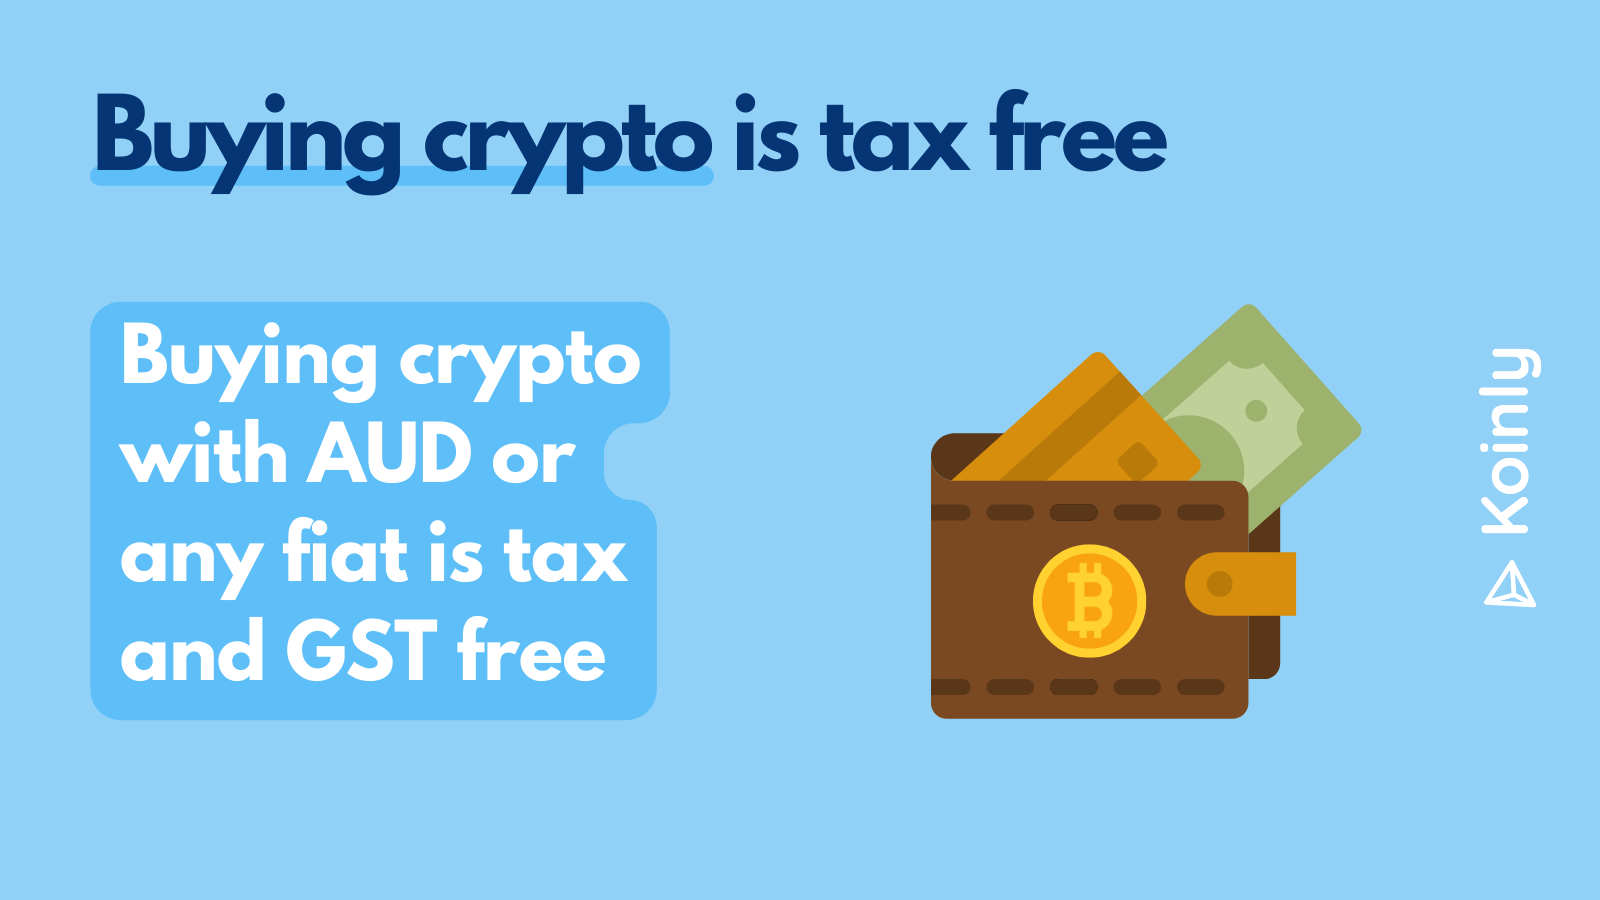 Buying crypto is tax free in Australia